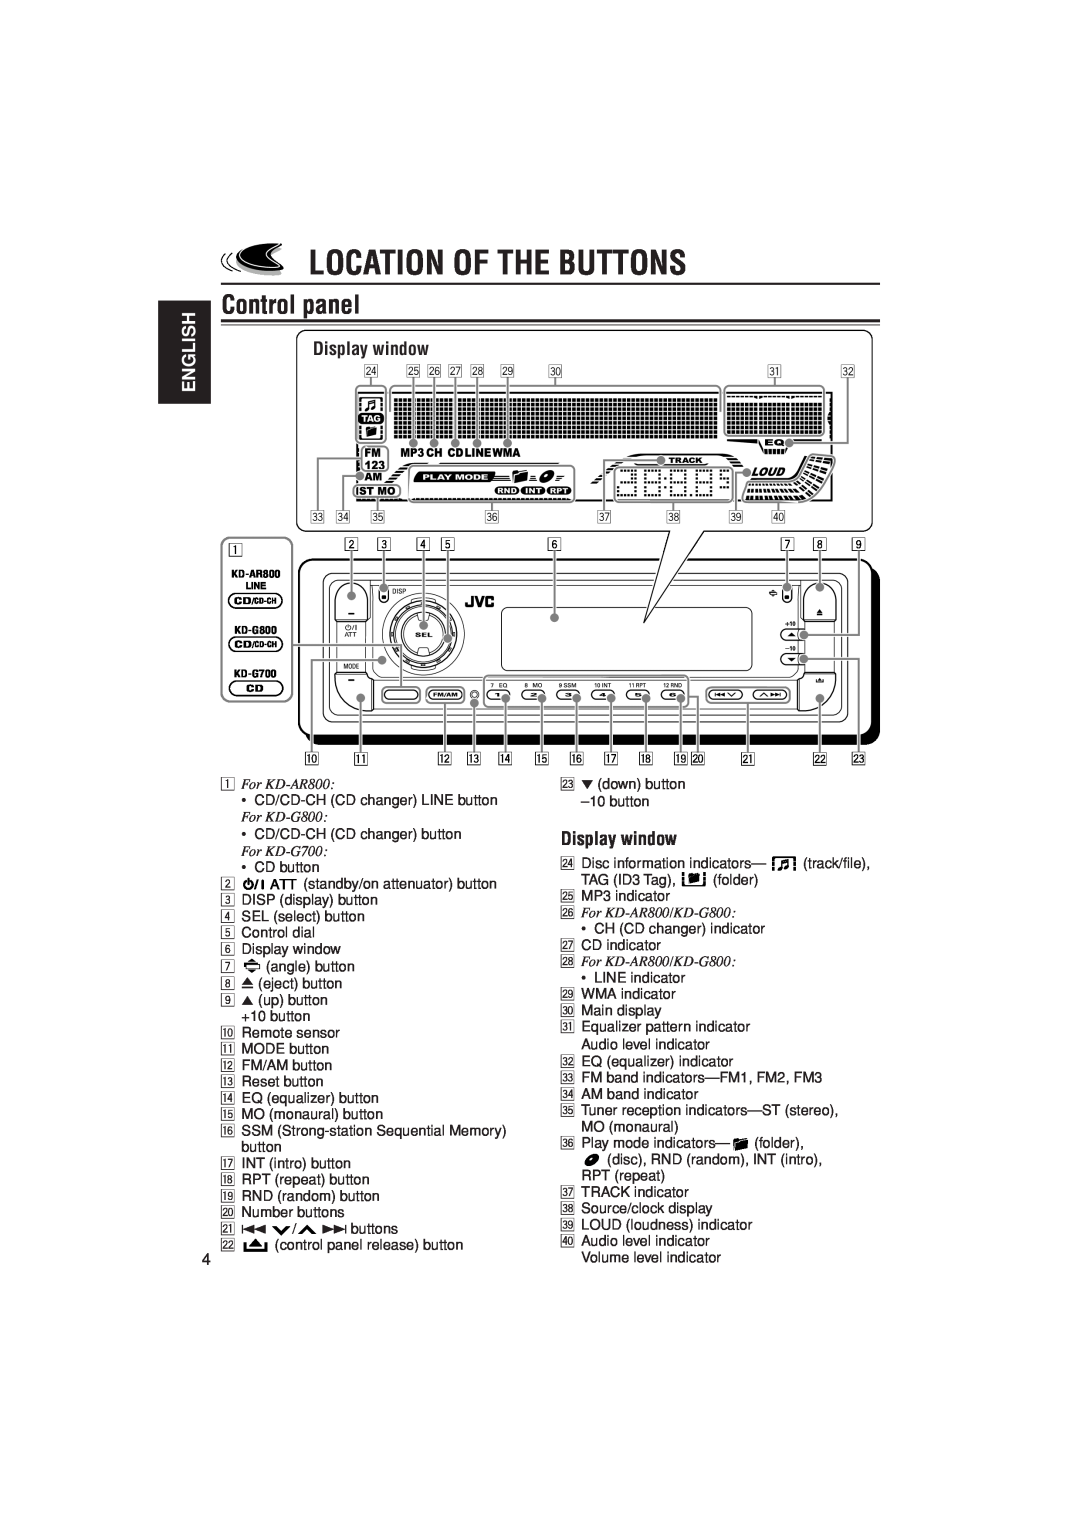 JVC KD-G700, KD-AR800, KD-G800 manual Location Of The Buttons, Control panel, Display window, English 